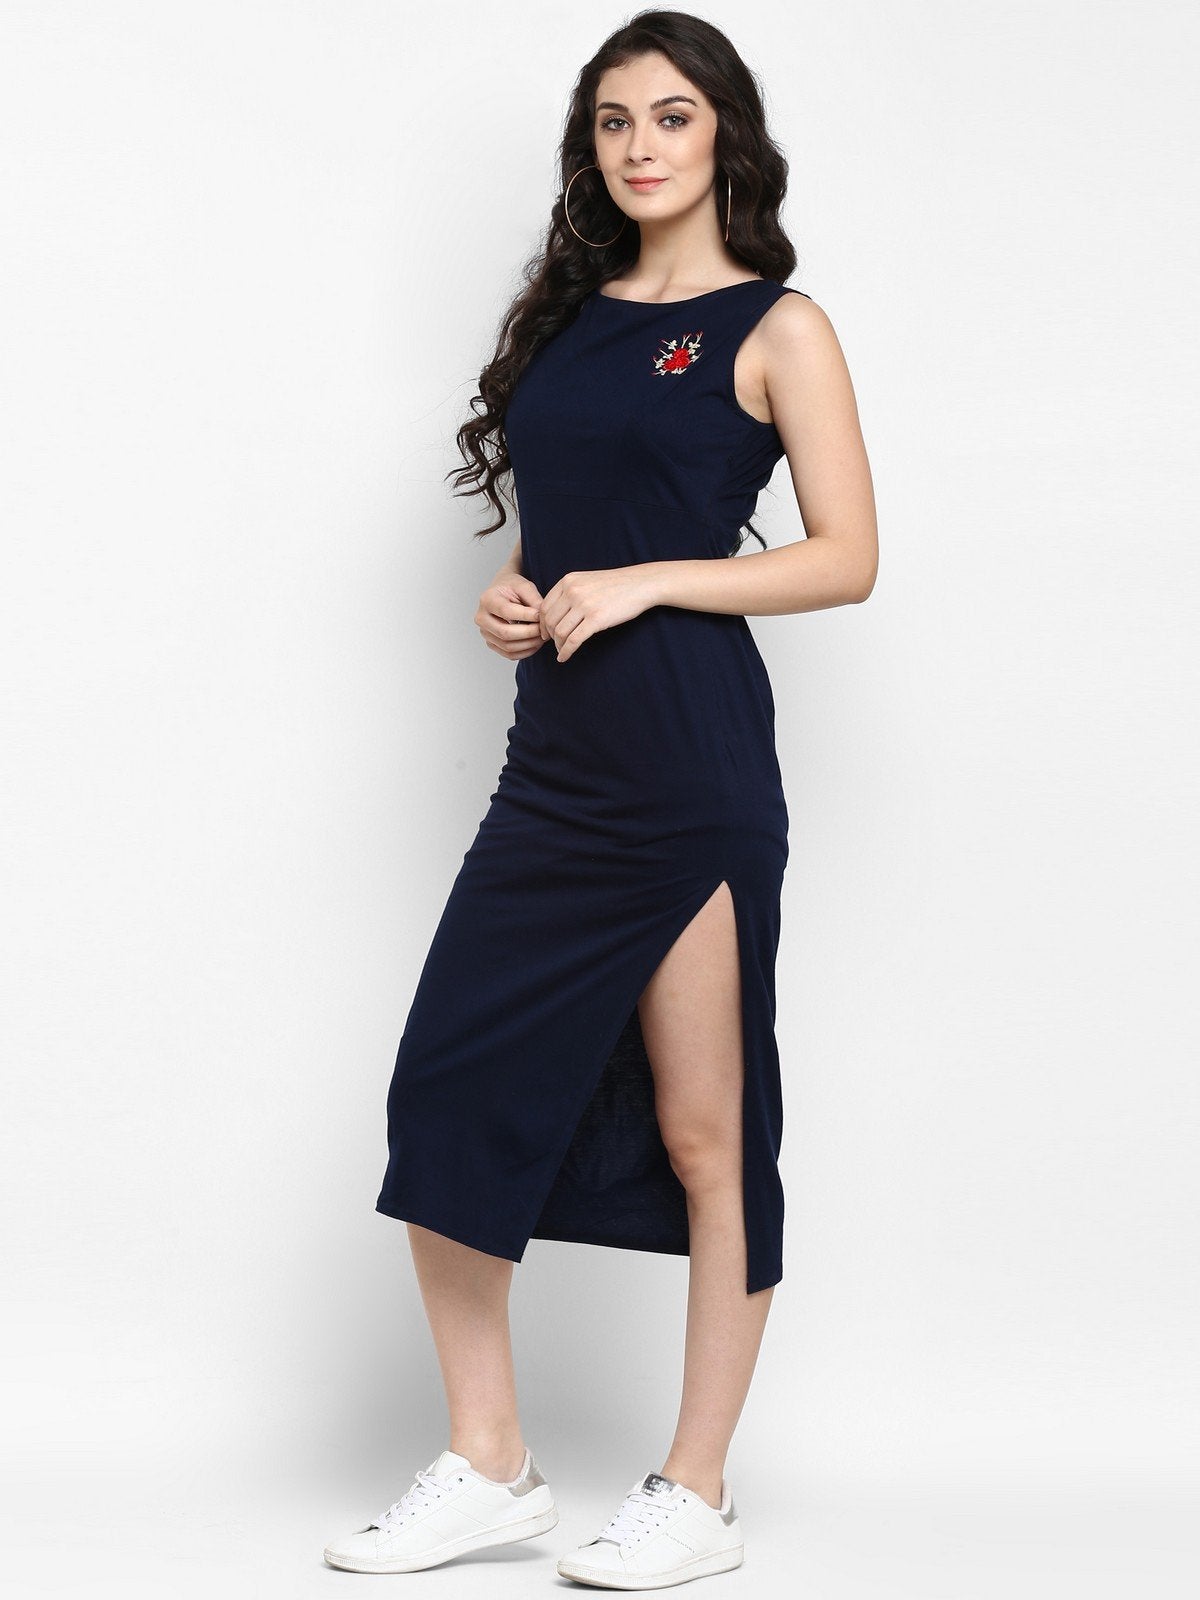 Women's Navy Embroidered Knitted Dress - Pannkh